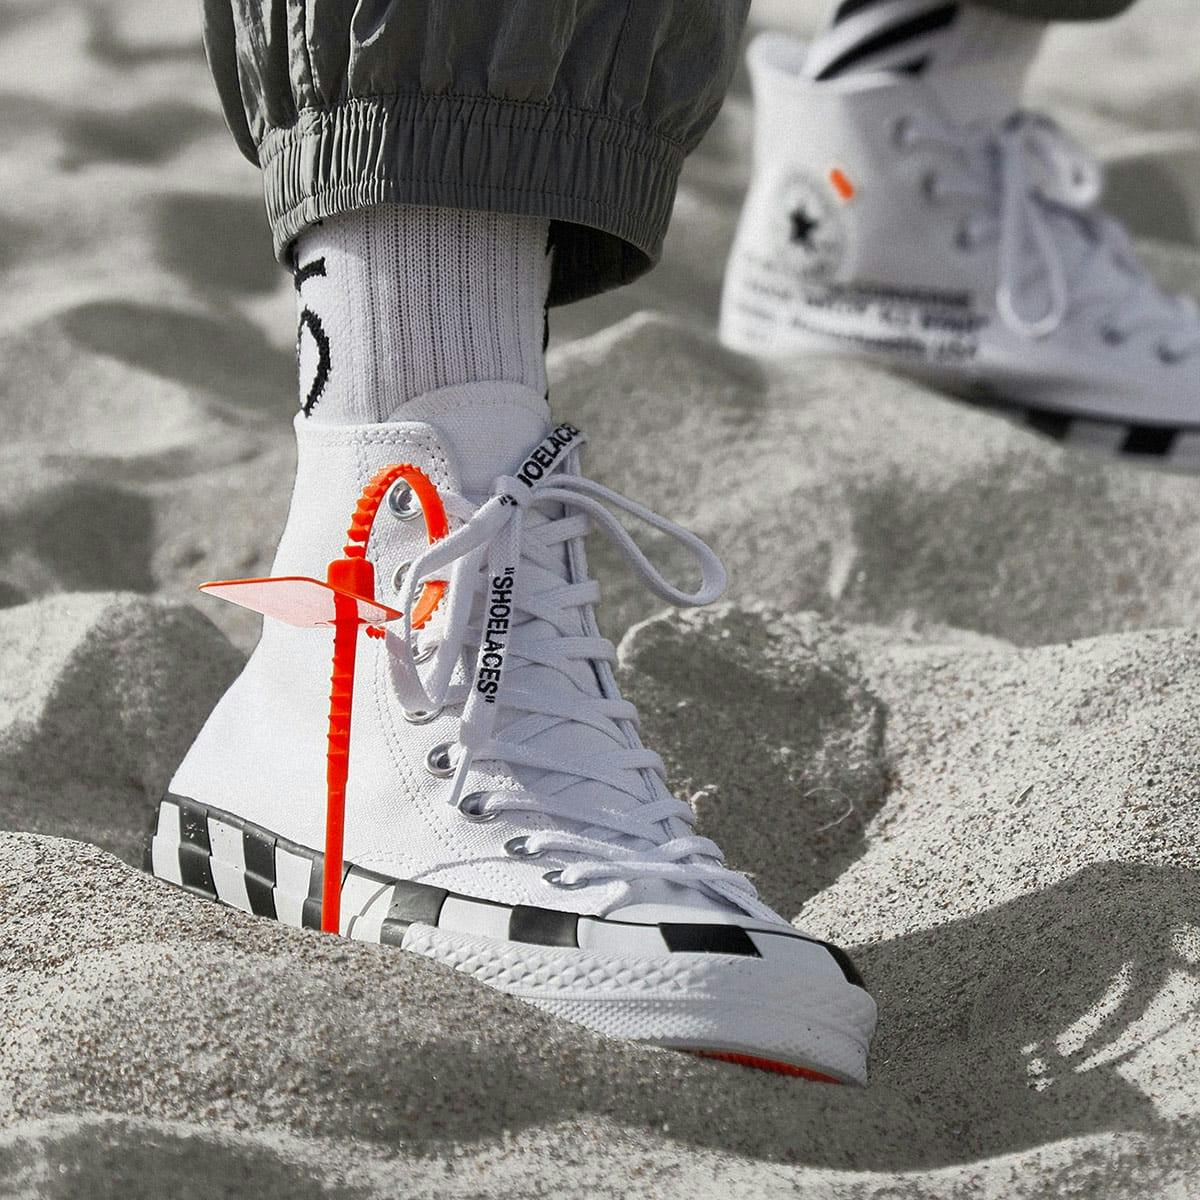 Converse Chuck 70 x Off-White Register Now on END. | END.